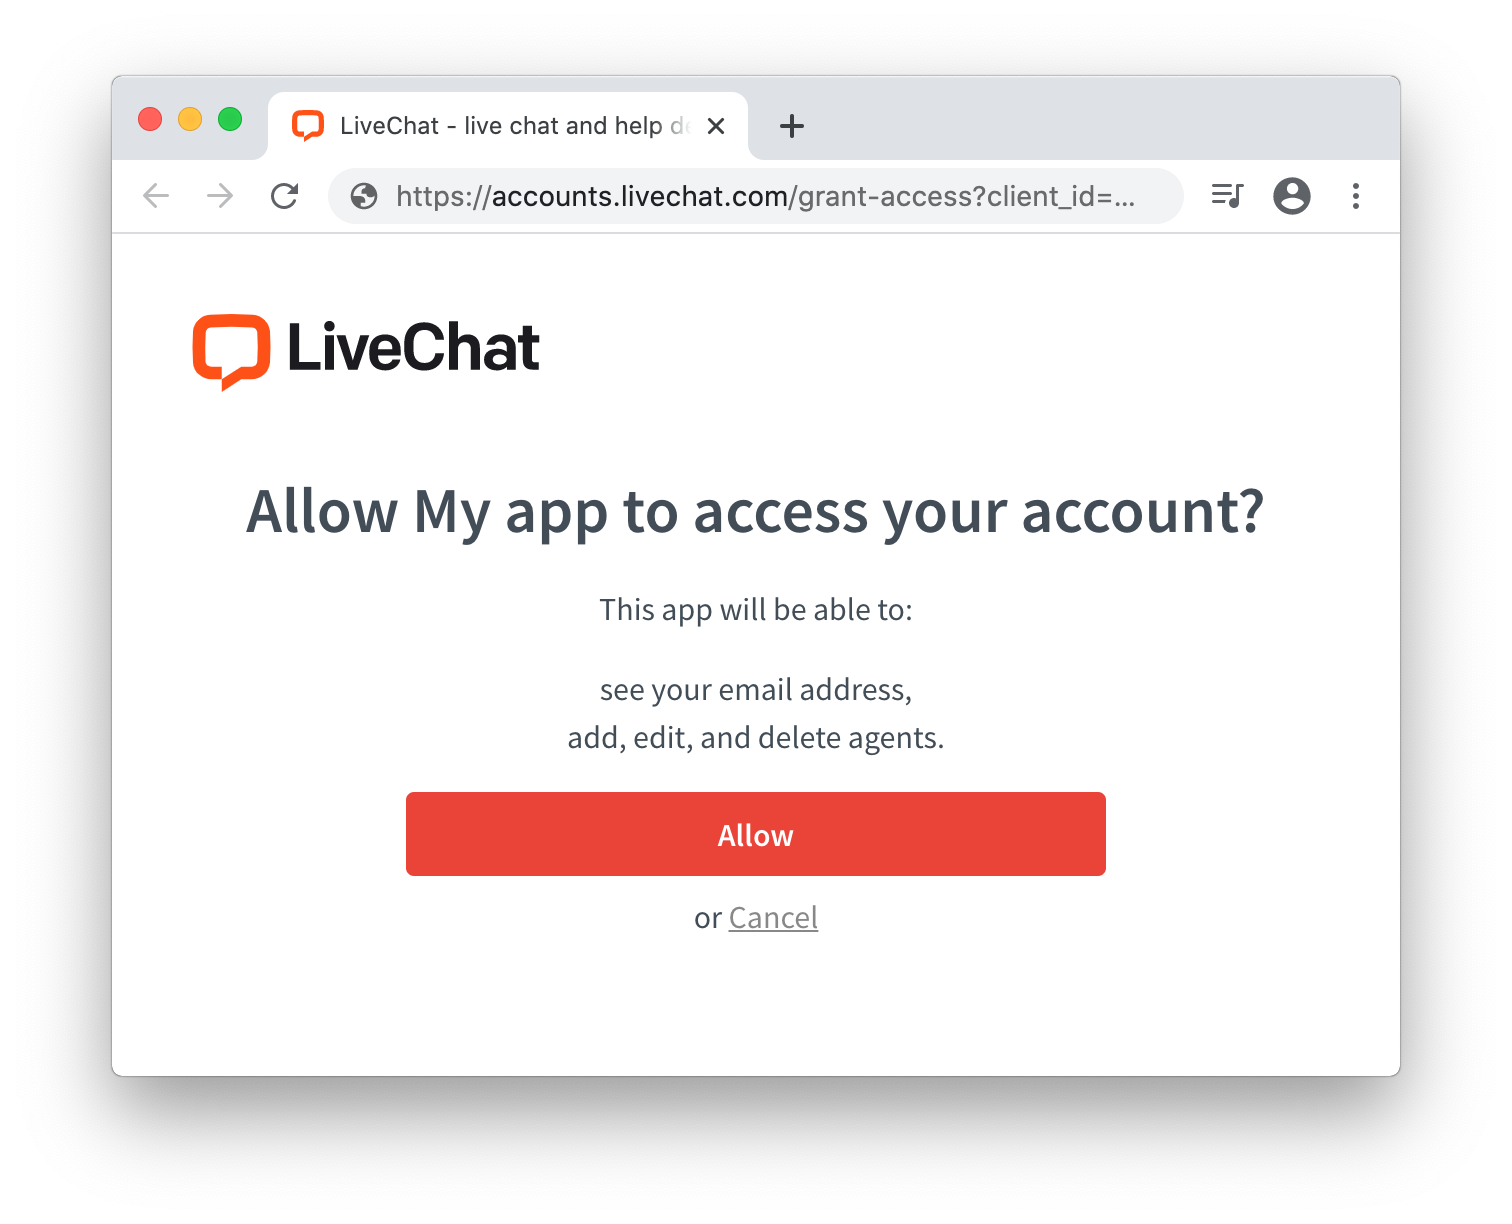 Grant access to LiveChat app